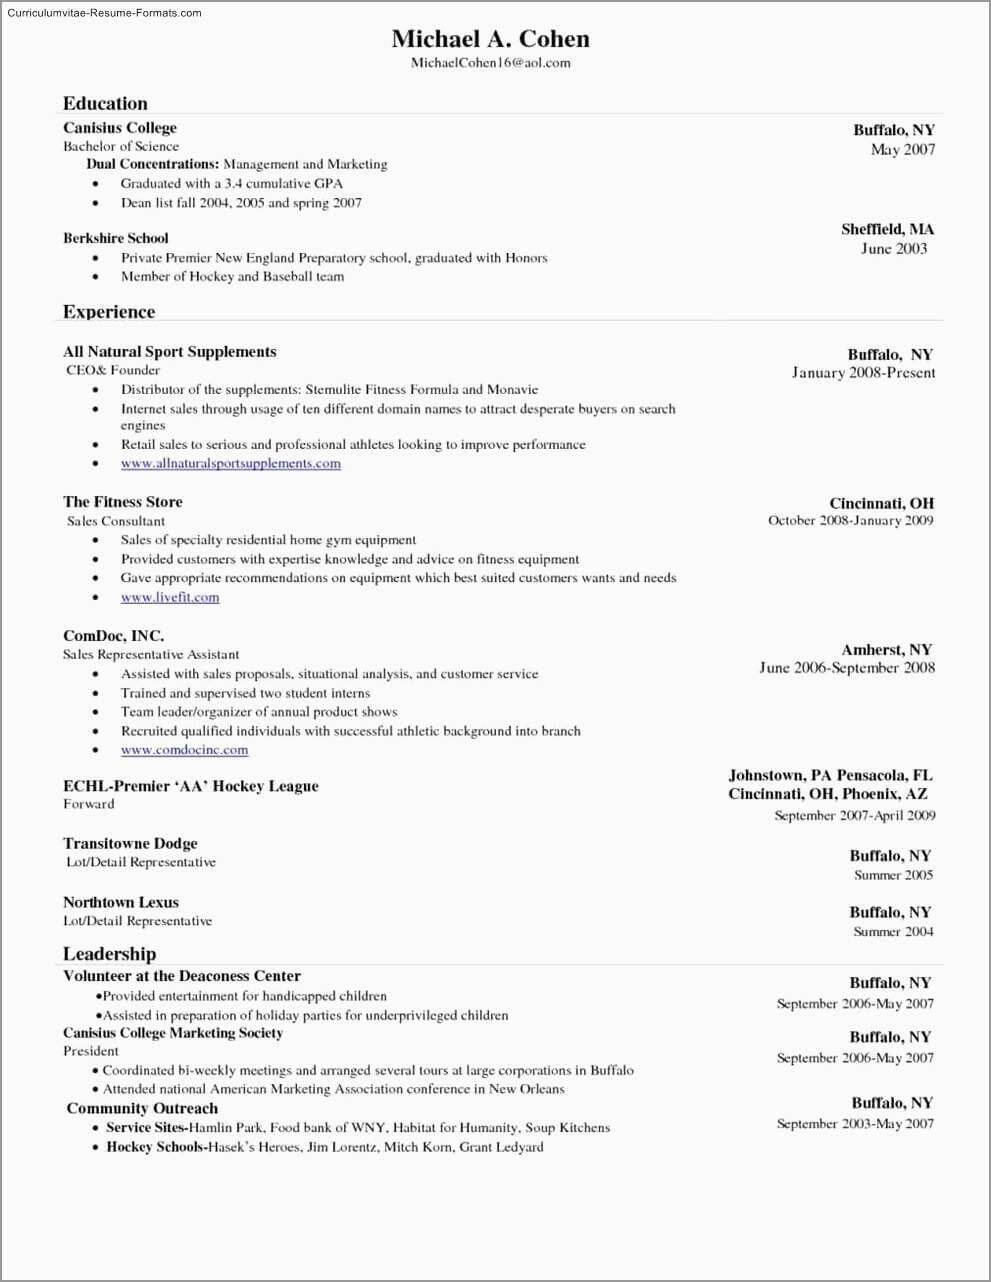 Microsoft Word 2010 Resume Template | Puntosalud With Resume Templates Microsoft Word 2010